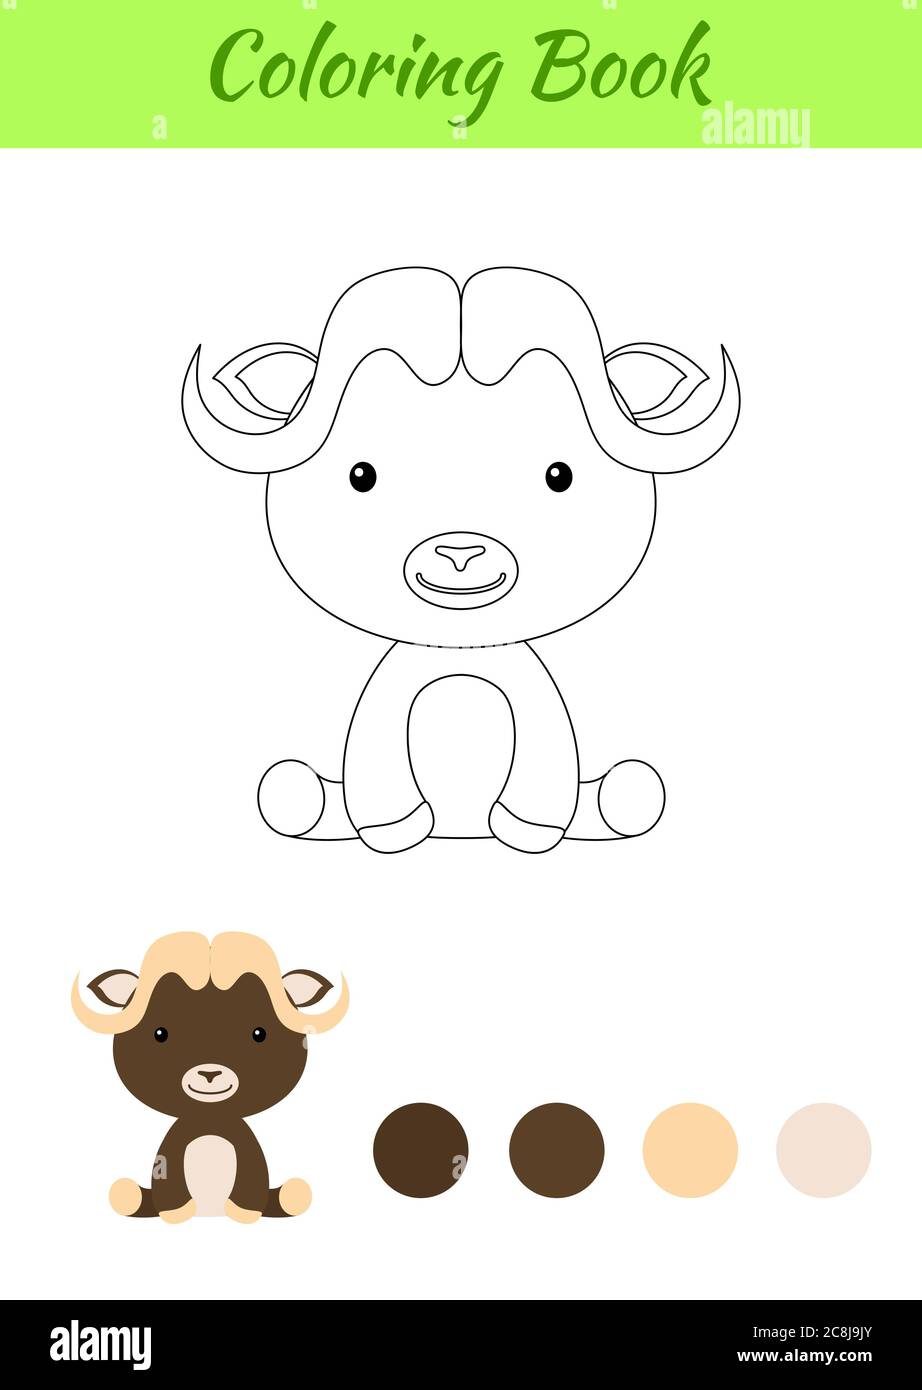 Download Coloring Page Little Sitting Baby Musk Ox Coloring Book For Kids Educational Activity For Preschool Years Kids And Toddlers With Cute Animal Stock Vector Image Art Alamy